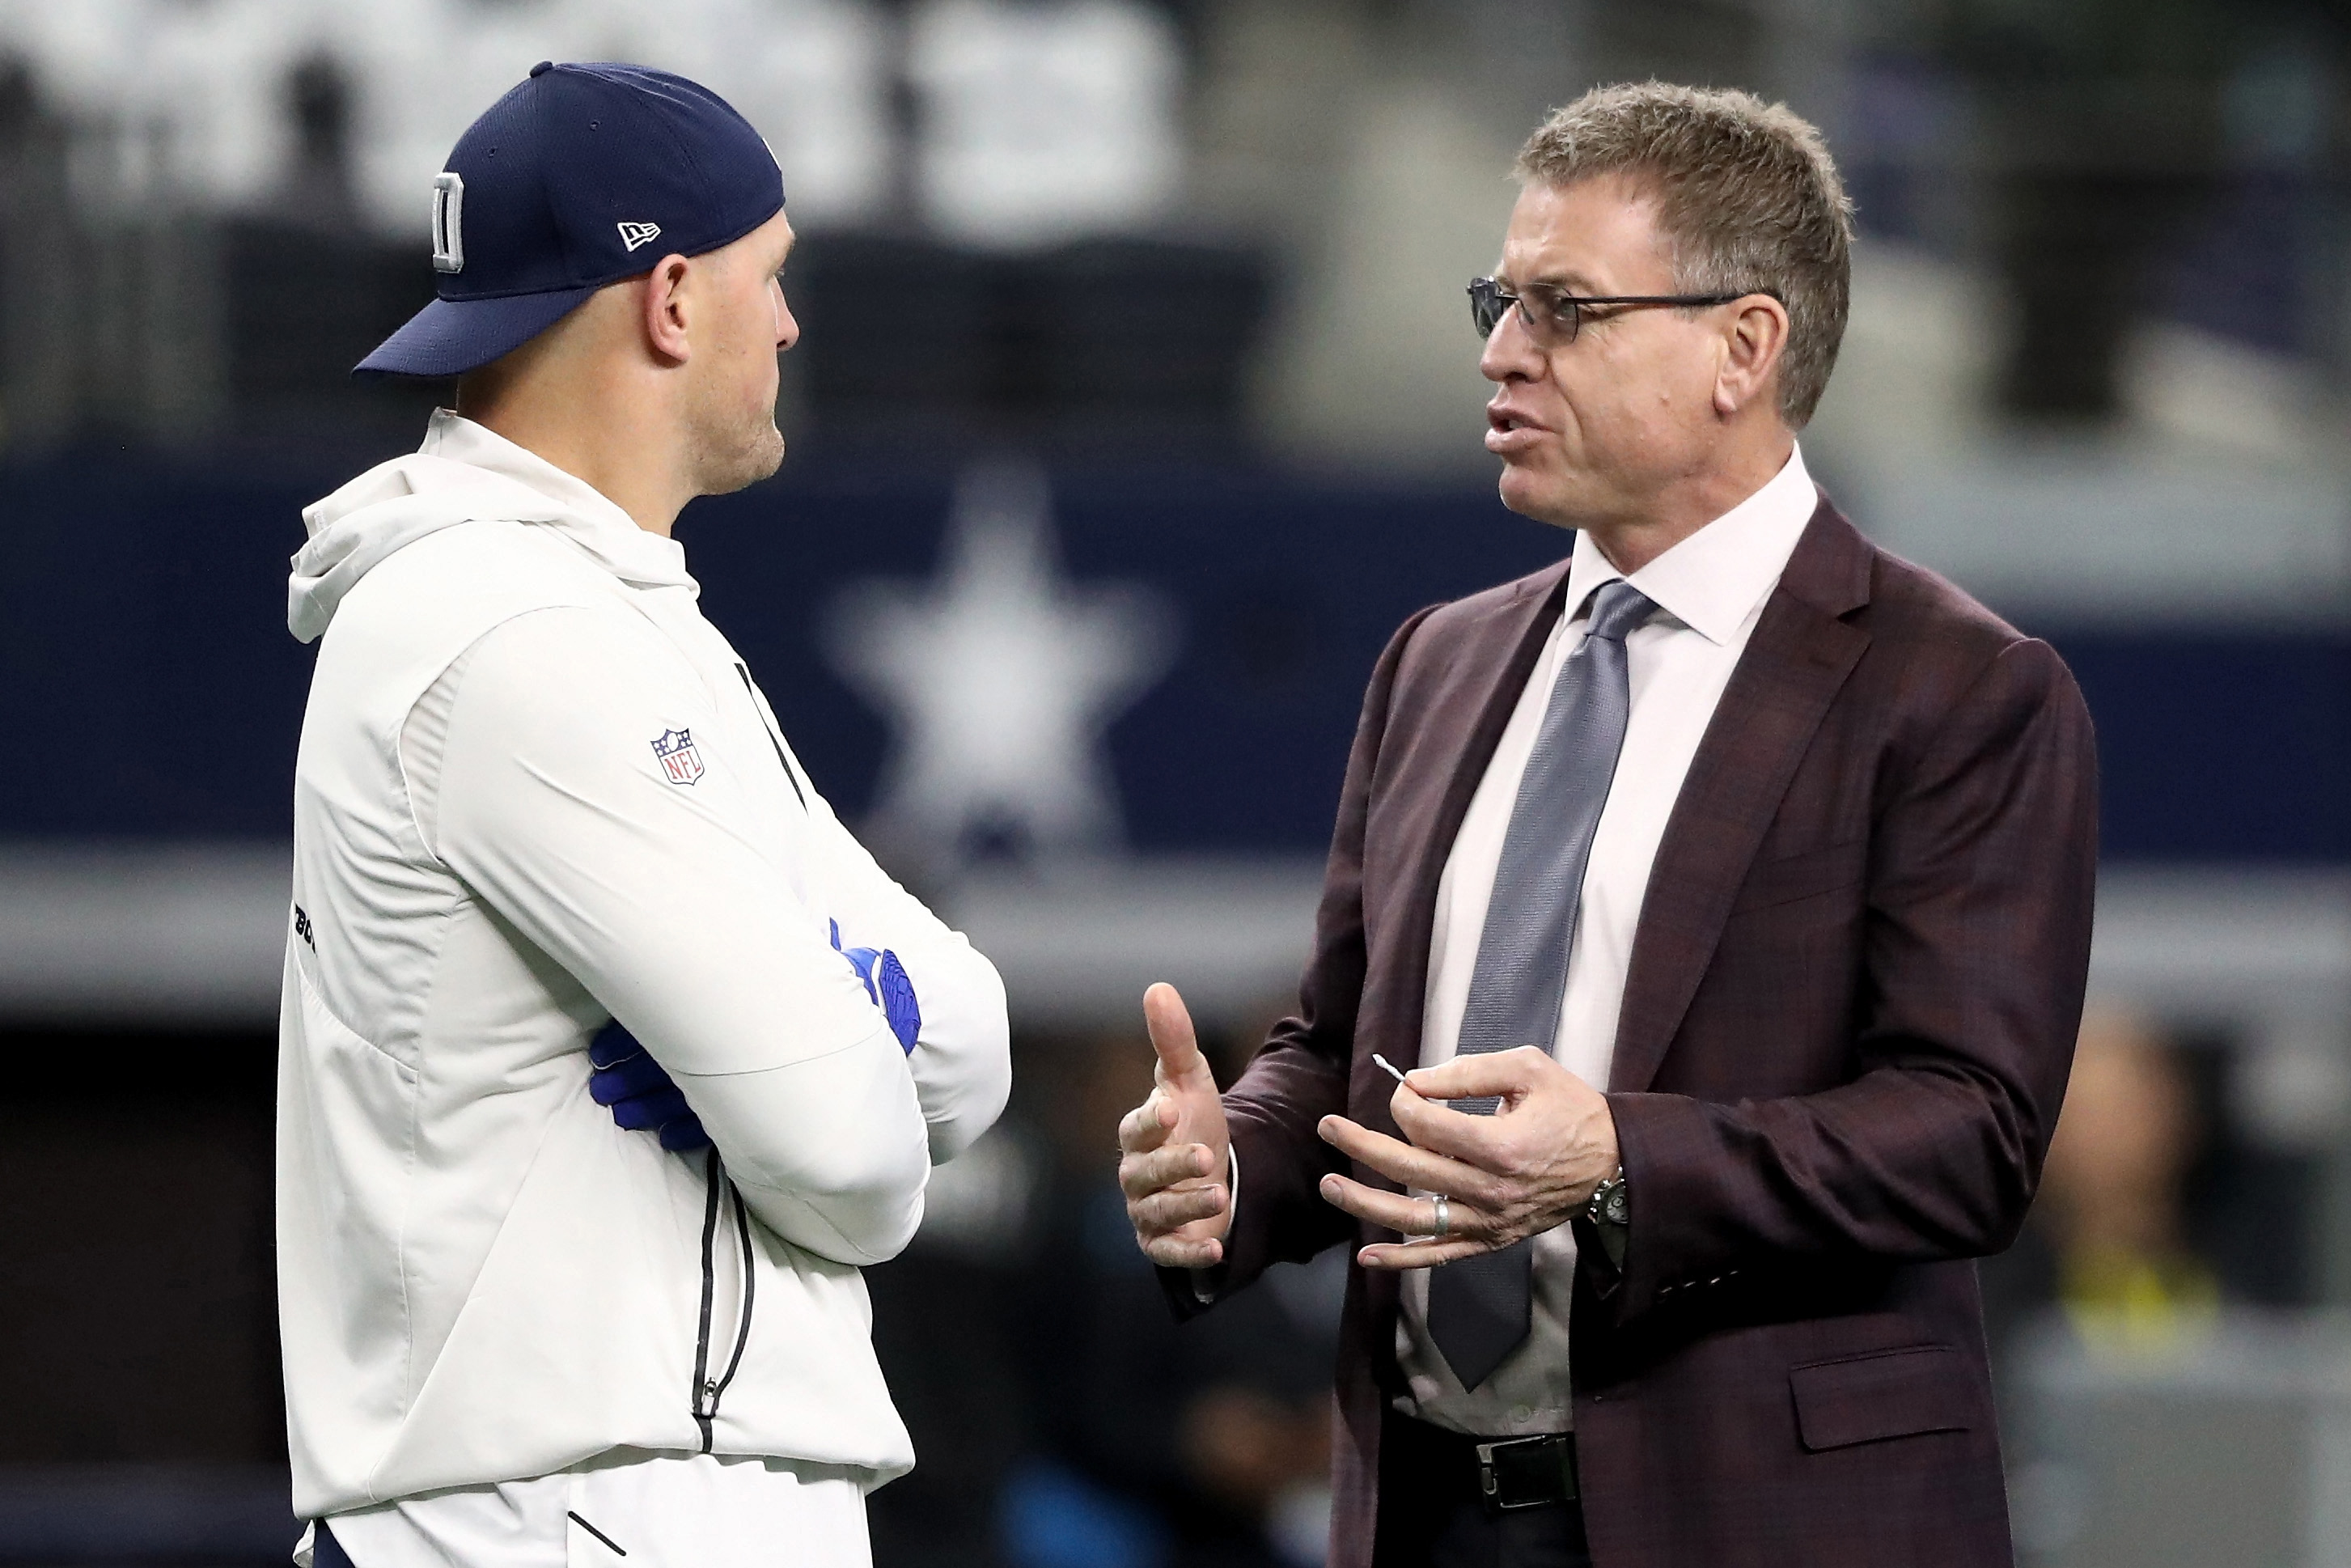 Troy Aikman's words may have been twisted.